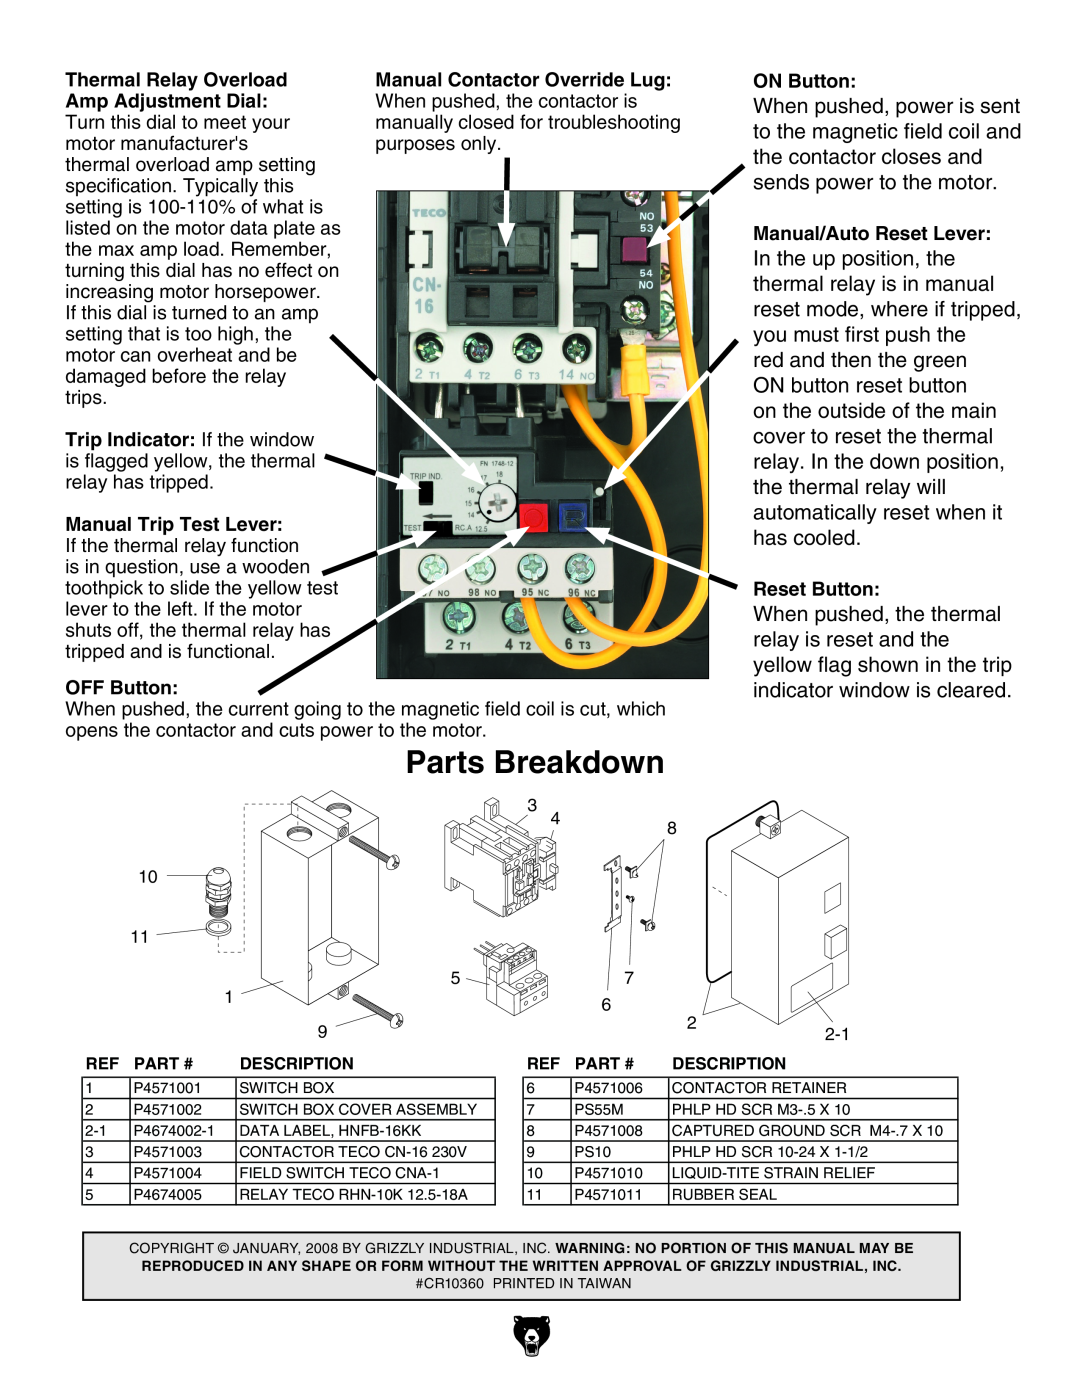 Grizzly G4674 instruction sheet Parts Breakdown 